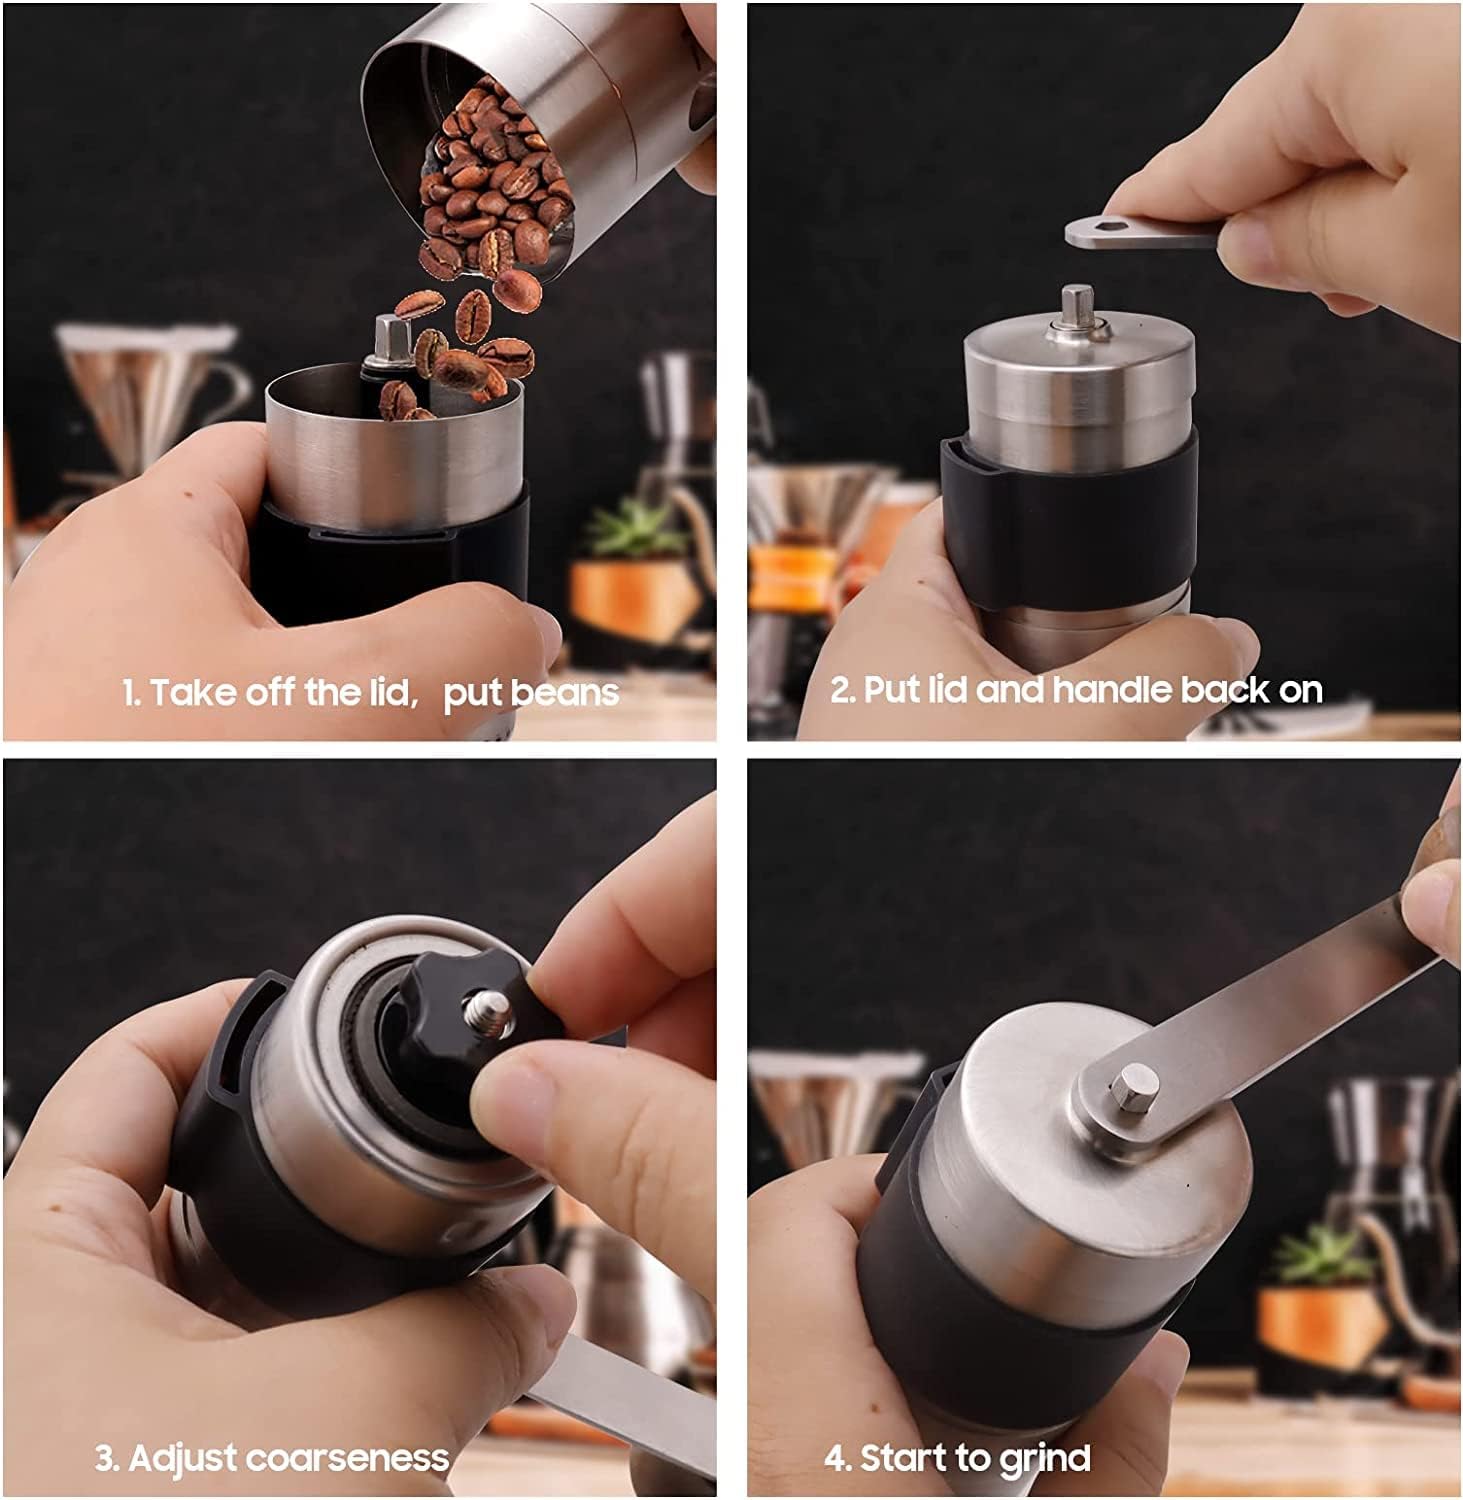 Portable Manual Coffee Grinder -Higher Hardness Conical Ceramic Burrs Stainless Steel Hand With Fine powder adjustment Settings Great Gift For Home Office Travel or Outdoor